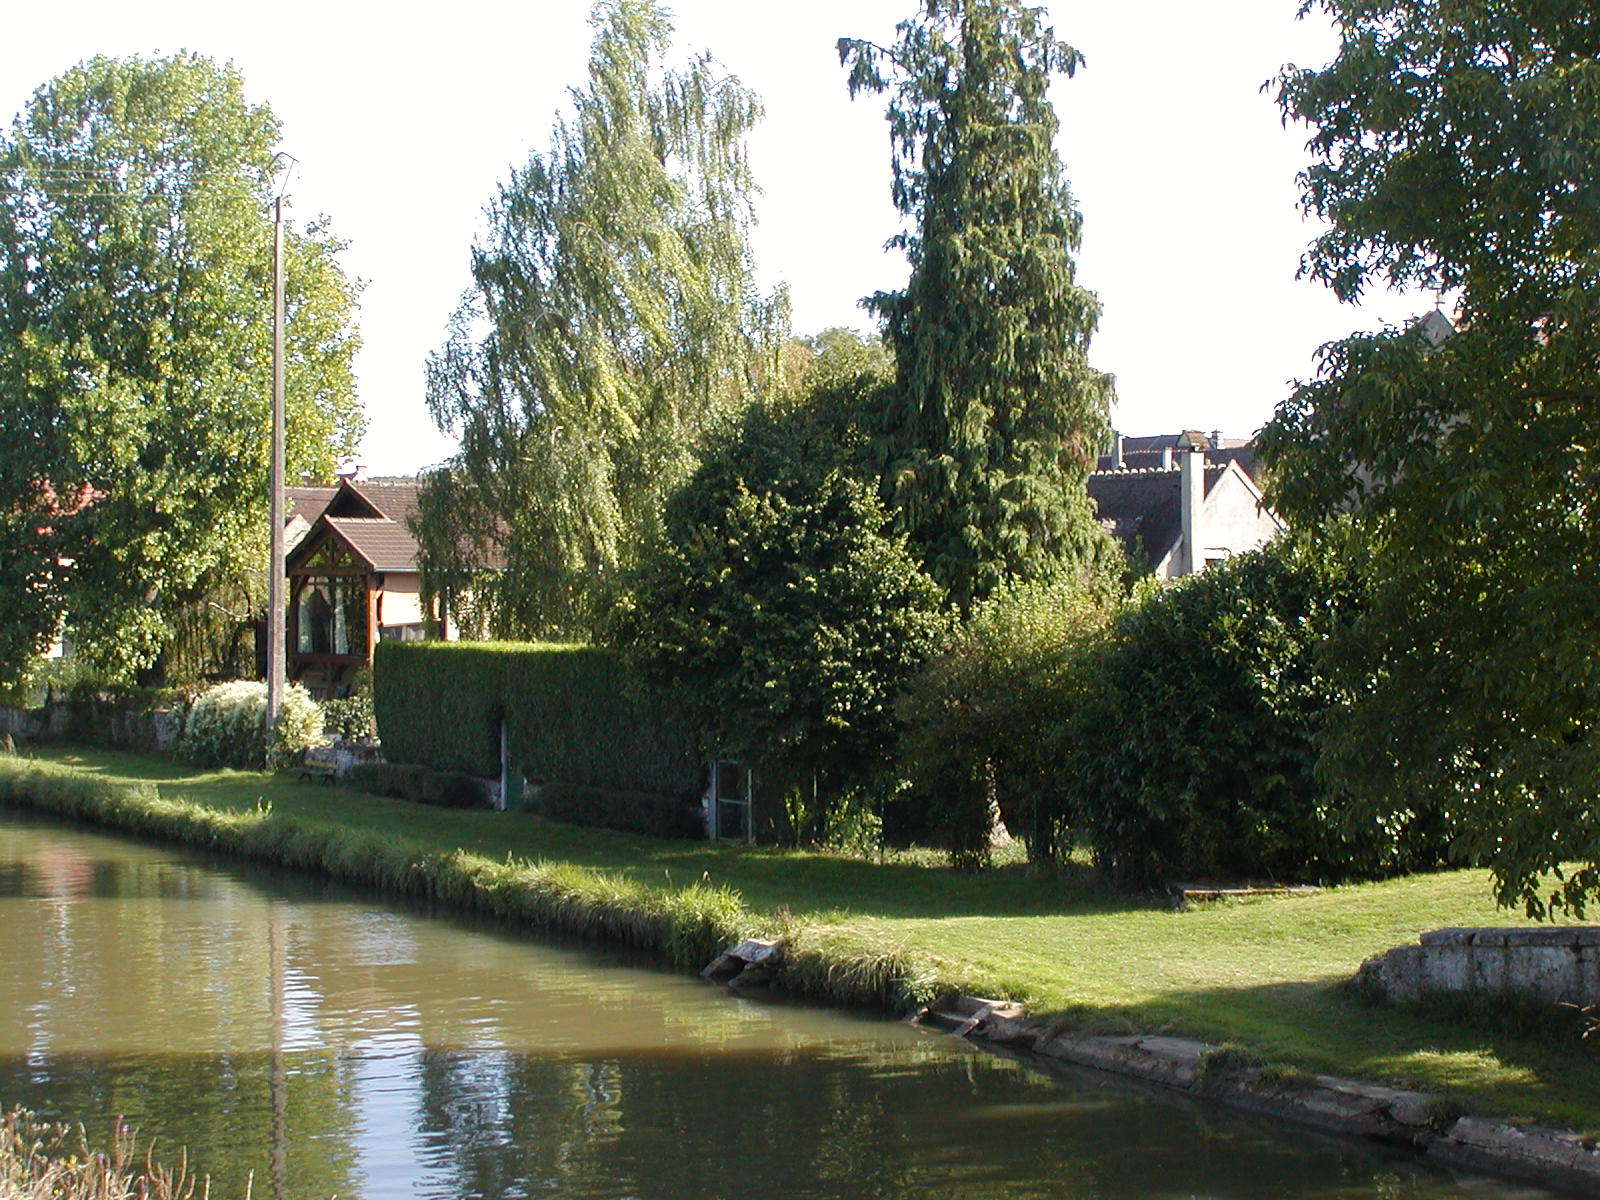 rear canal view chalet left between trees & studio behind trees on right.JPG